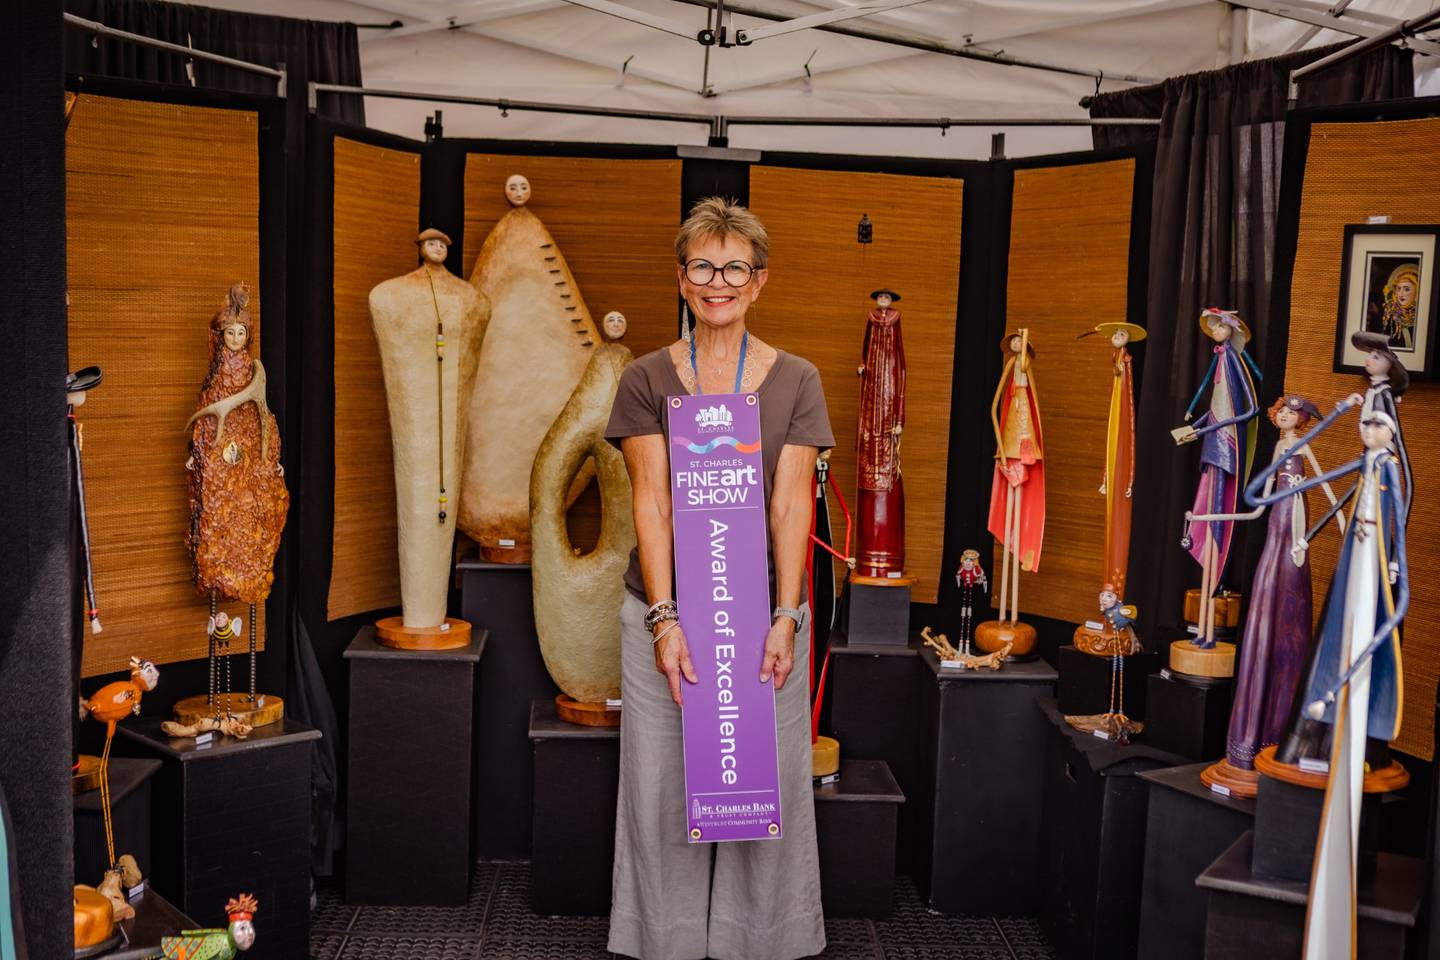 Sculpture Artist Skeeter Aschinger received the Award of Excellence at the 2023 St. Charles Fine Art Show, and will return for this year's show.